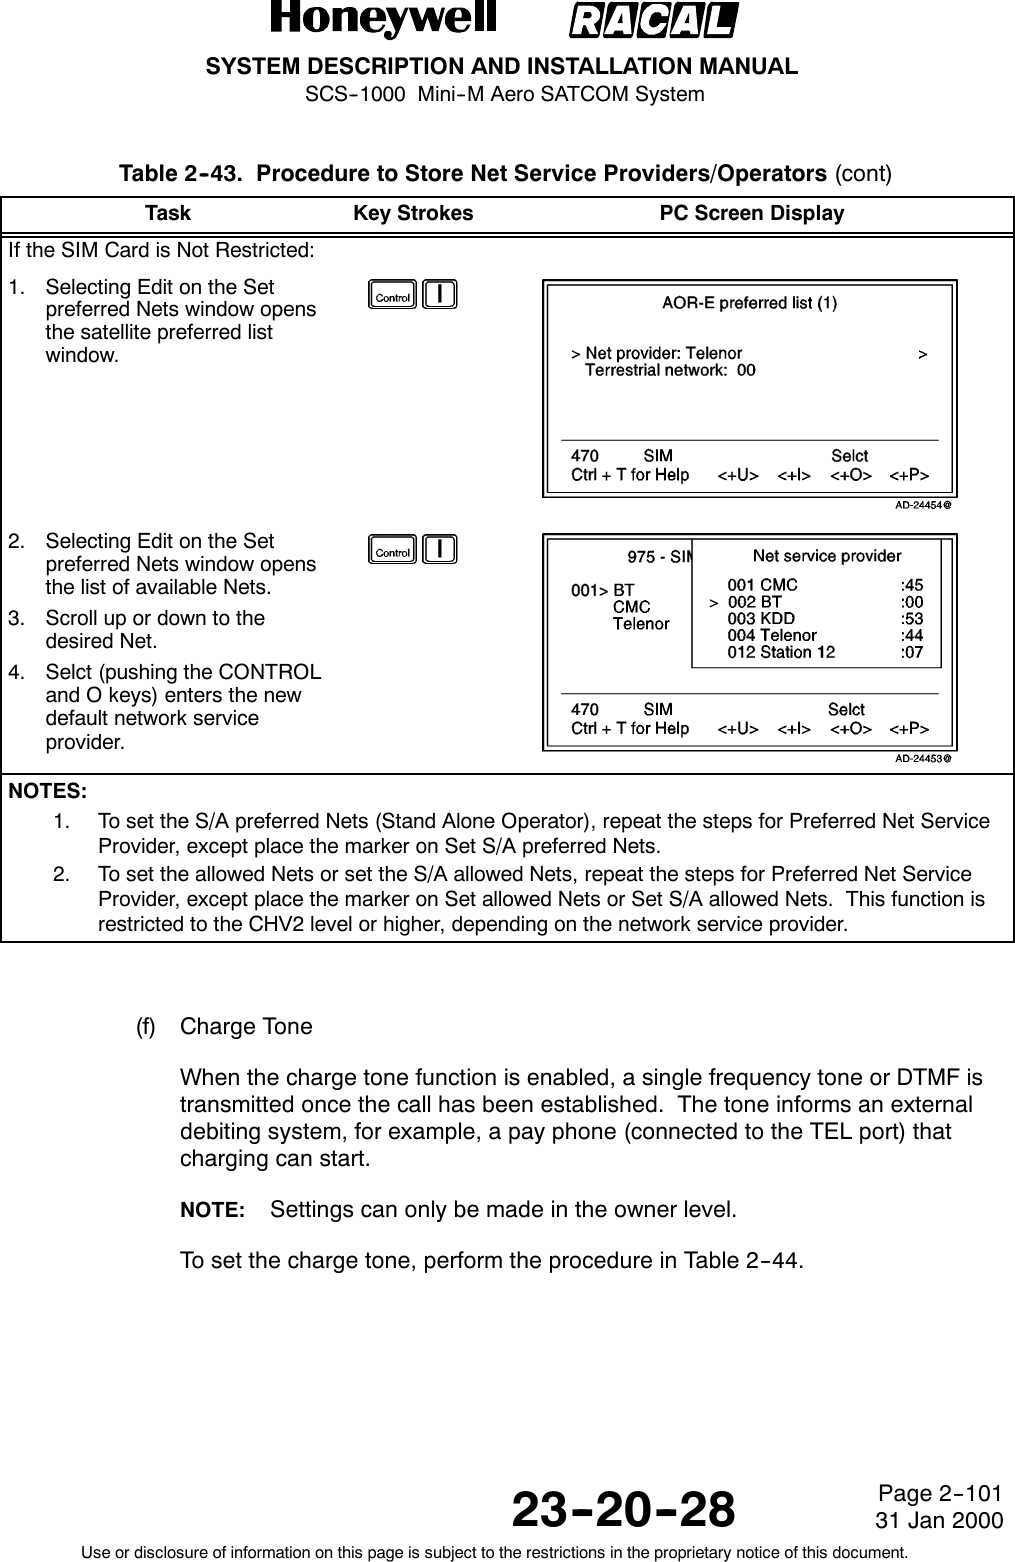 SYSTEM DESCRIPTION AND INSTALLATION MANUALSCS--1000 Mini--M Aero SATCOM System23--20--28Use or disclosure of information on this page is subject to the restrictions in the proprietary notice of this document.Page 2--10131 Jan 2000Table 2--43. Procedure to Store Net Service Providers/Operators (cont)Task PC Screen DisplayKey StrokesIf the SIM Card is Not Restricted:1. Selecting Edit on the Setpreferred Nets window opensthe satellite preferred listwindow.2. Selecting Edit on the Setpreferred Nets window opensthe list of available Nets.3. Scroll up or down to thedesired Net.4. Selct (pushing the CONTROLand O keys) enters the newdefault network serviceprovider.NOTES:1. To set the S/A preferred Nets (Stand Alone Operator), repeat the steps for Preferred Net ServiceProvider, except place the marker on Set S/A preferred Nets.2. To set the allowed Nets or set the S/A allowed Nets, repeat the steps for Preferred Net ServiceProvider, except place the marker on Set allowed Nets or Set S/A allowed Nets. This function isrestricted to the CHV2 level or higher, depending on the network service provider.(f) Charge ToneWhen the charge tone function is enabled, a single frequency tone or DTMF istransmitted once the call has been established. The tone informs an externaldebiting system, for example, a pay phone (connected to the TEL port) thatcharging can start.NOTE: Settings can only be made in the owner level.To set the charge tone, perform the procedure in Table 2--44.